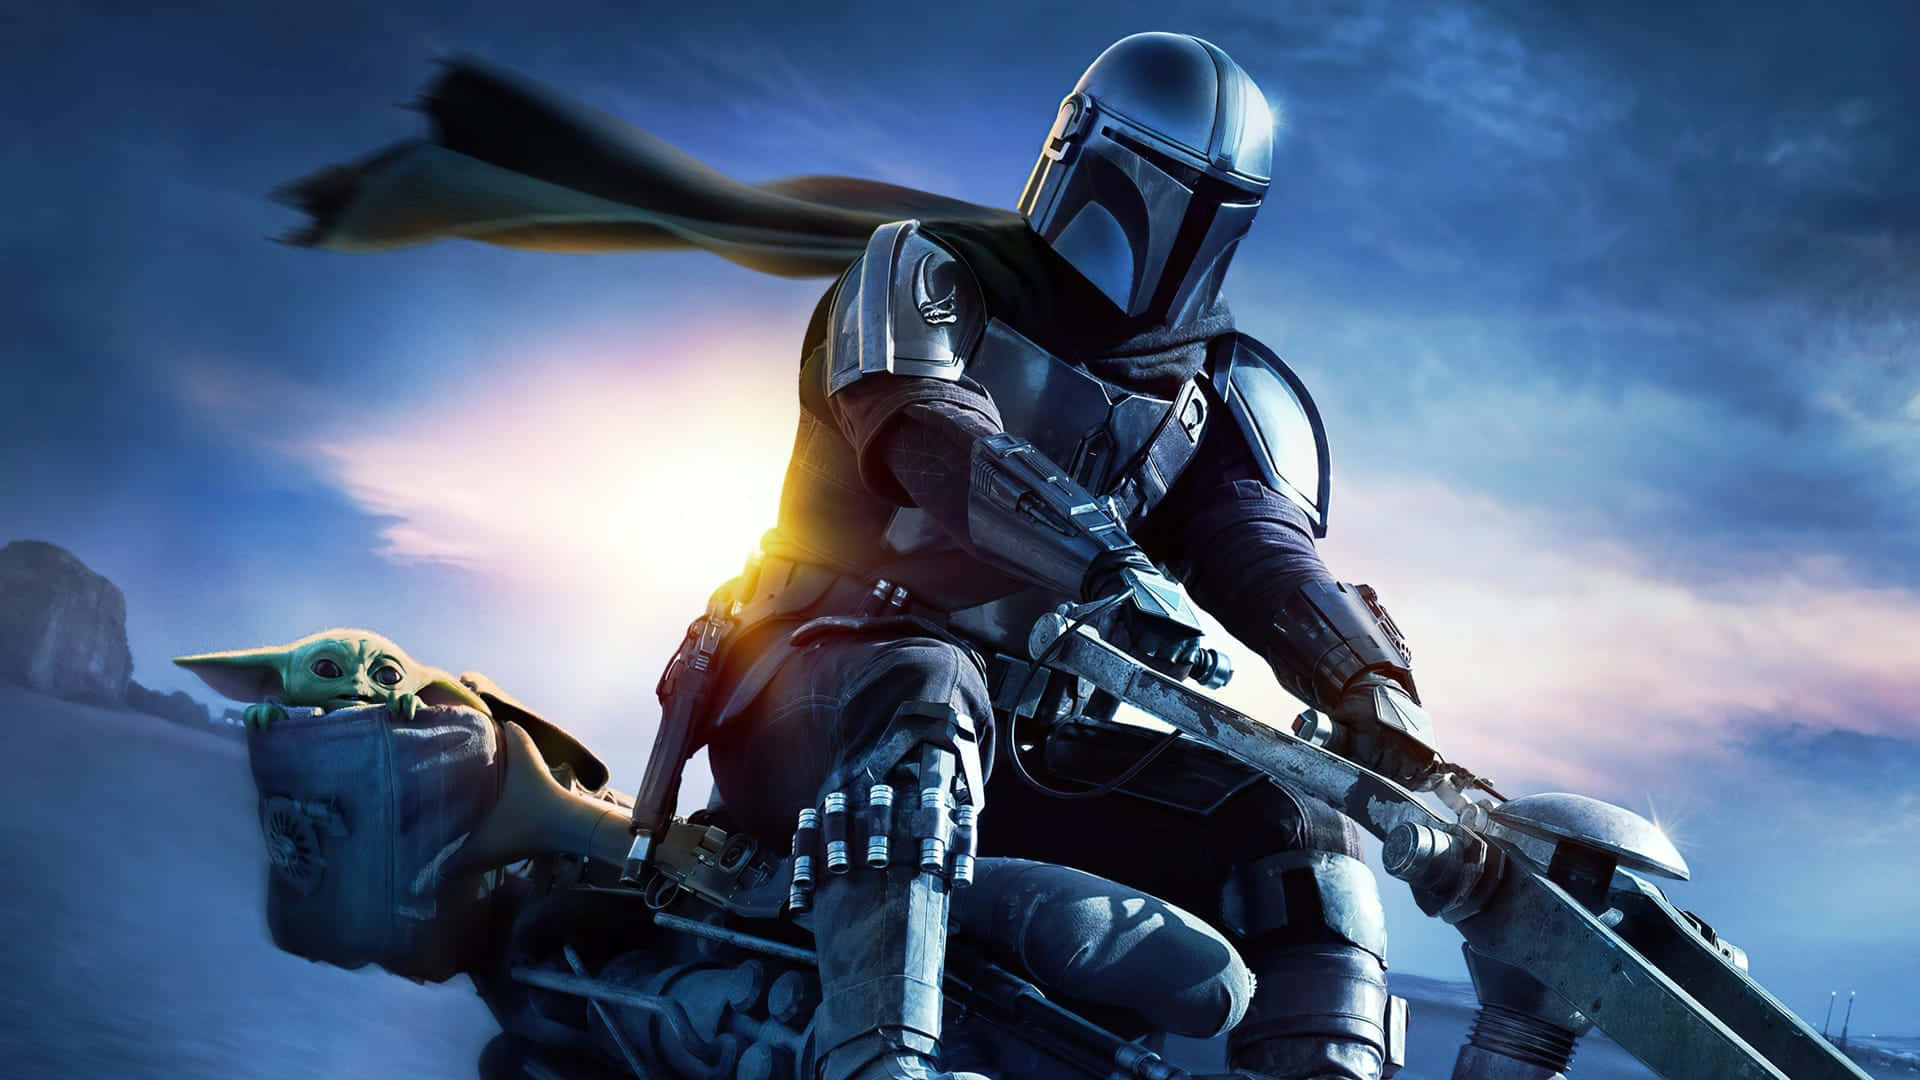 Battle for the future with Mandalorian PC Wallpaper